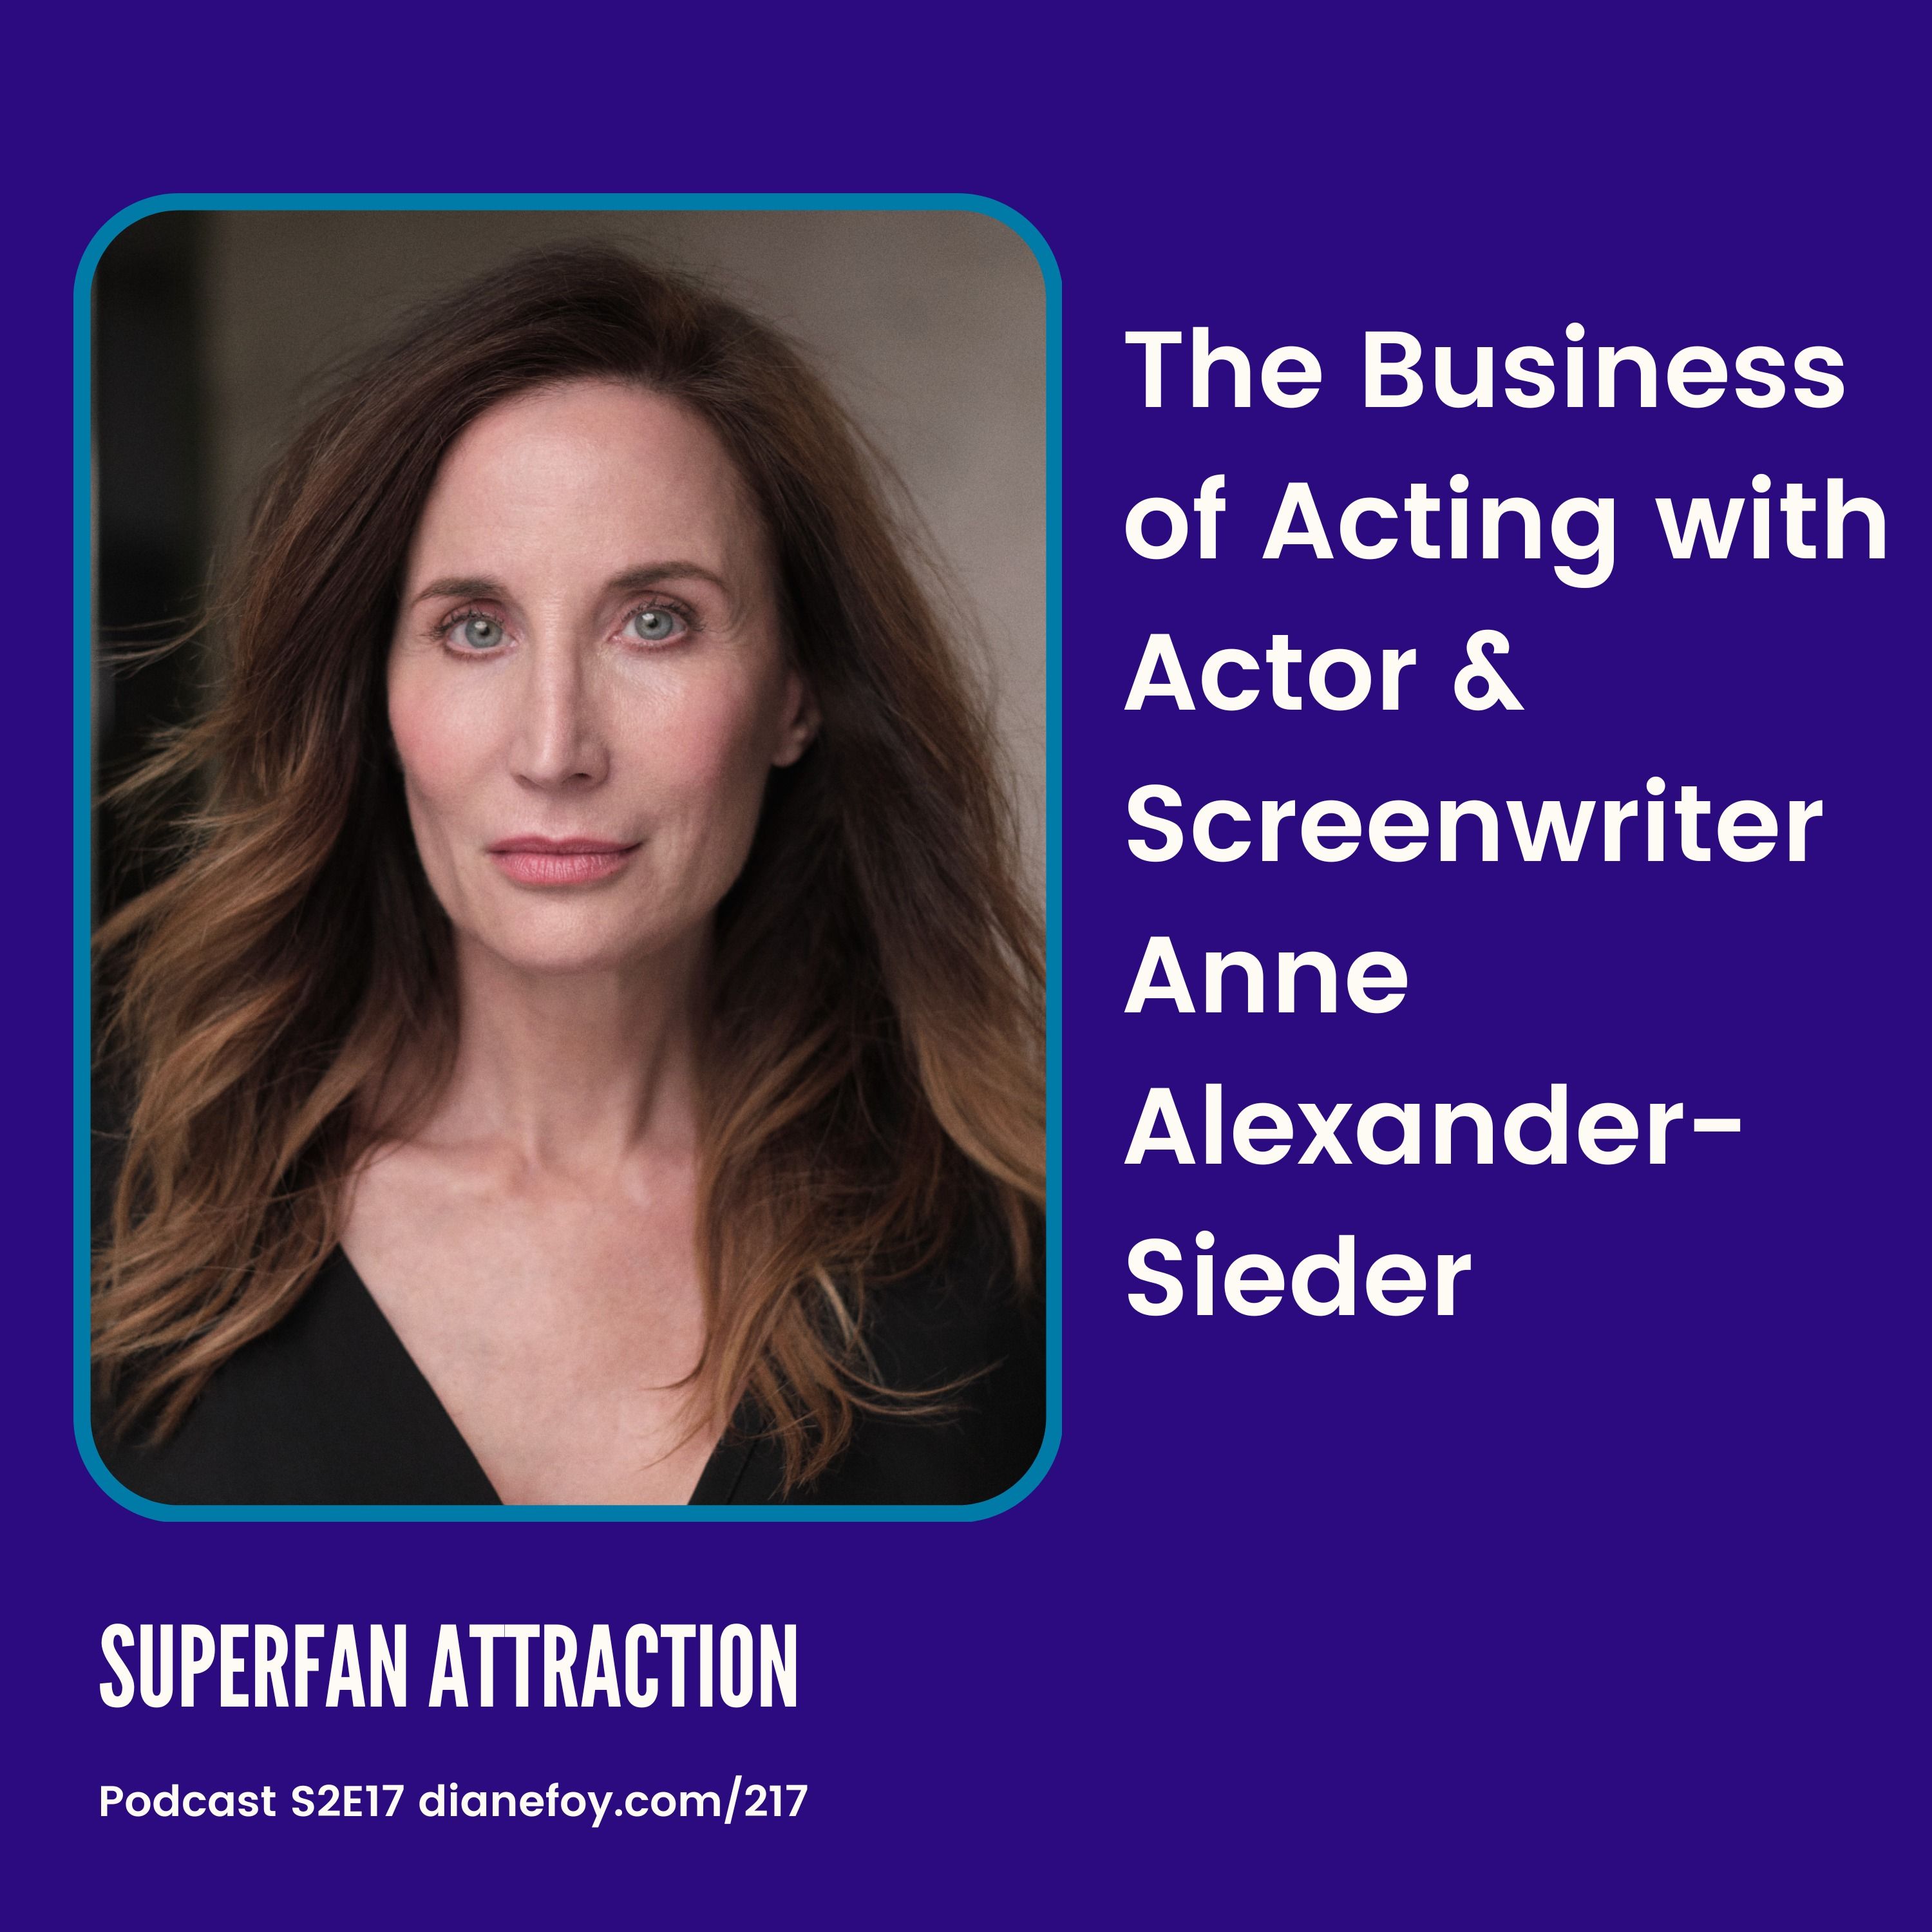 Business of Acting with Actor & Screenwriter Anne Alexander-Sieder